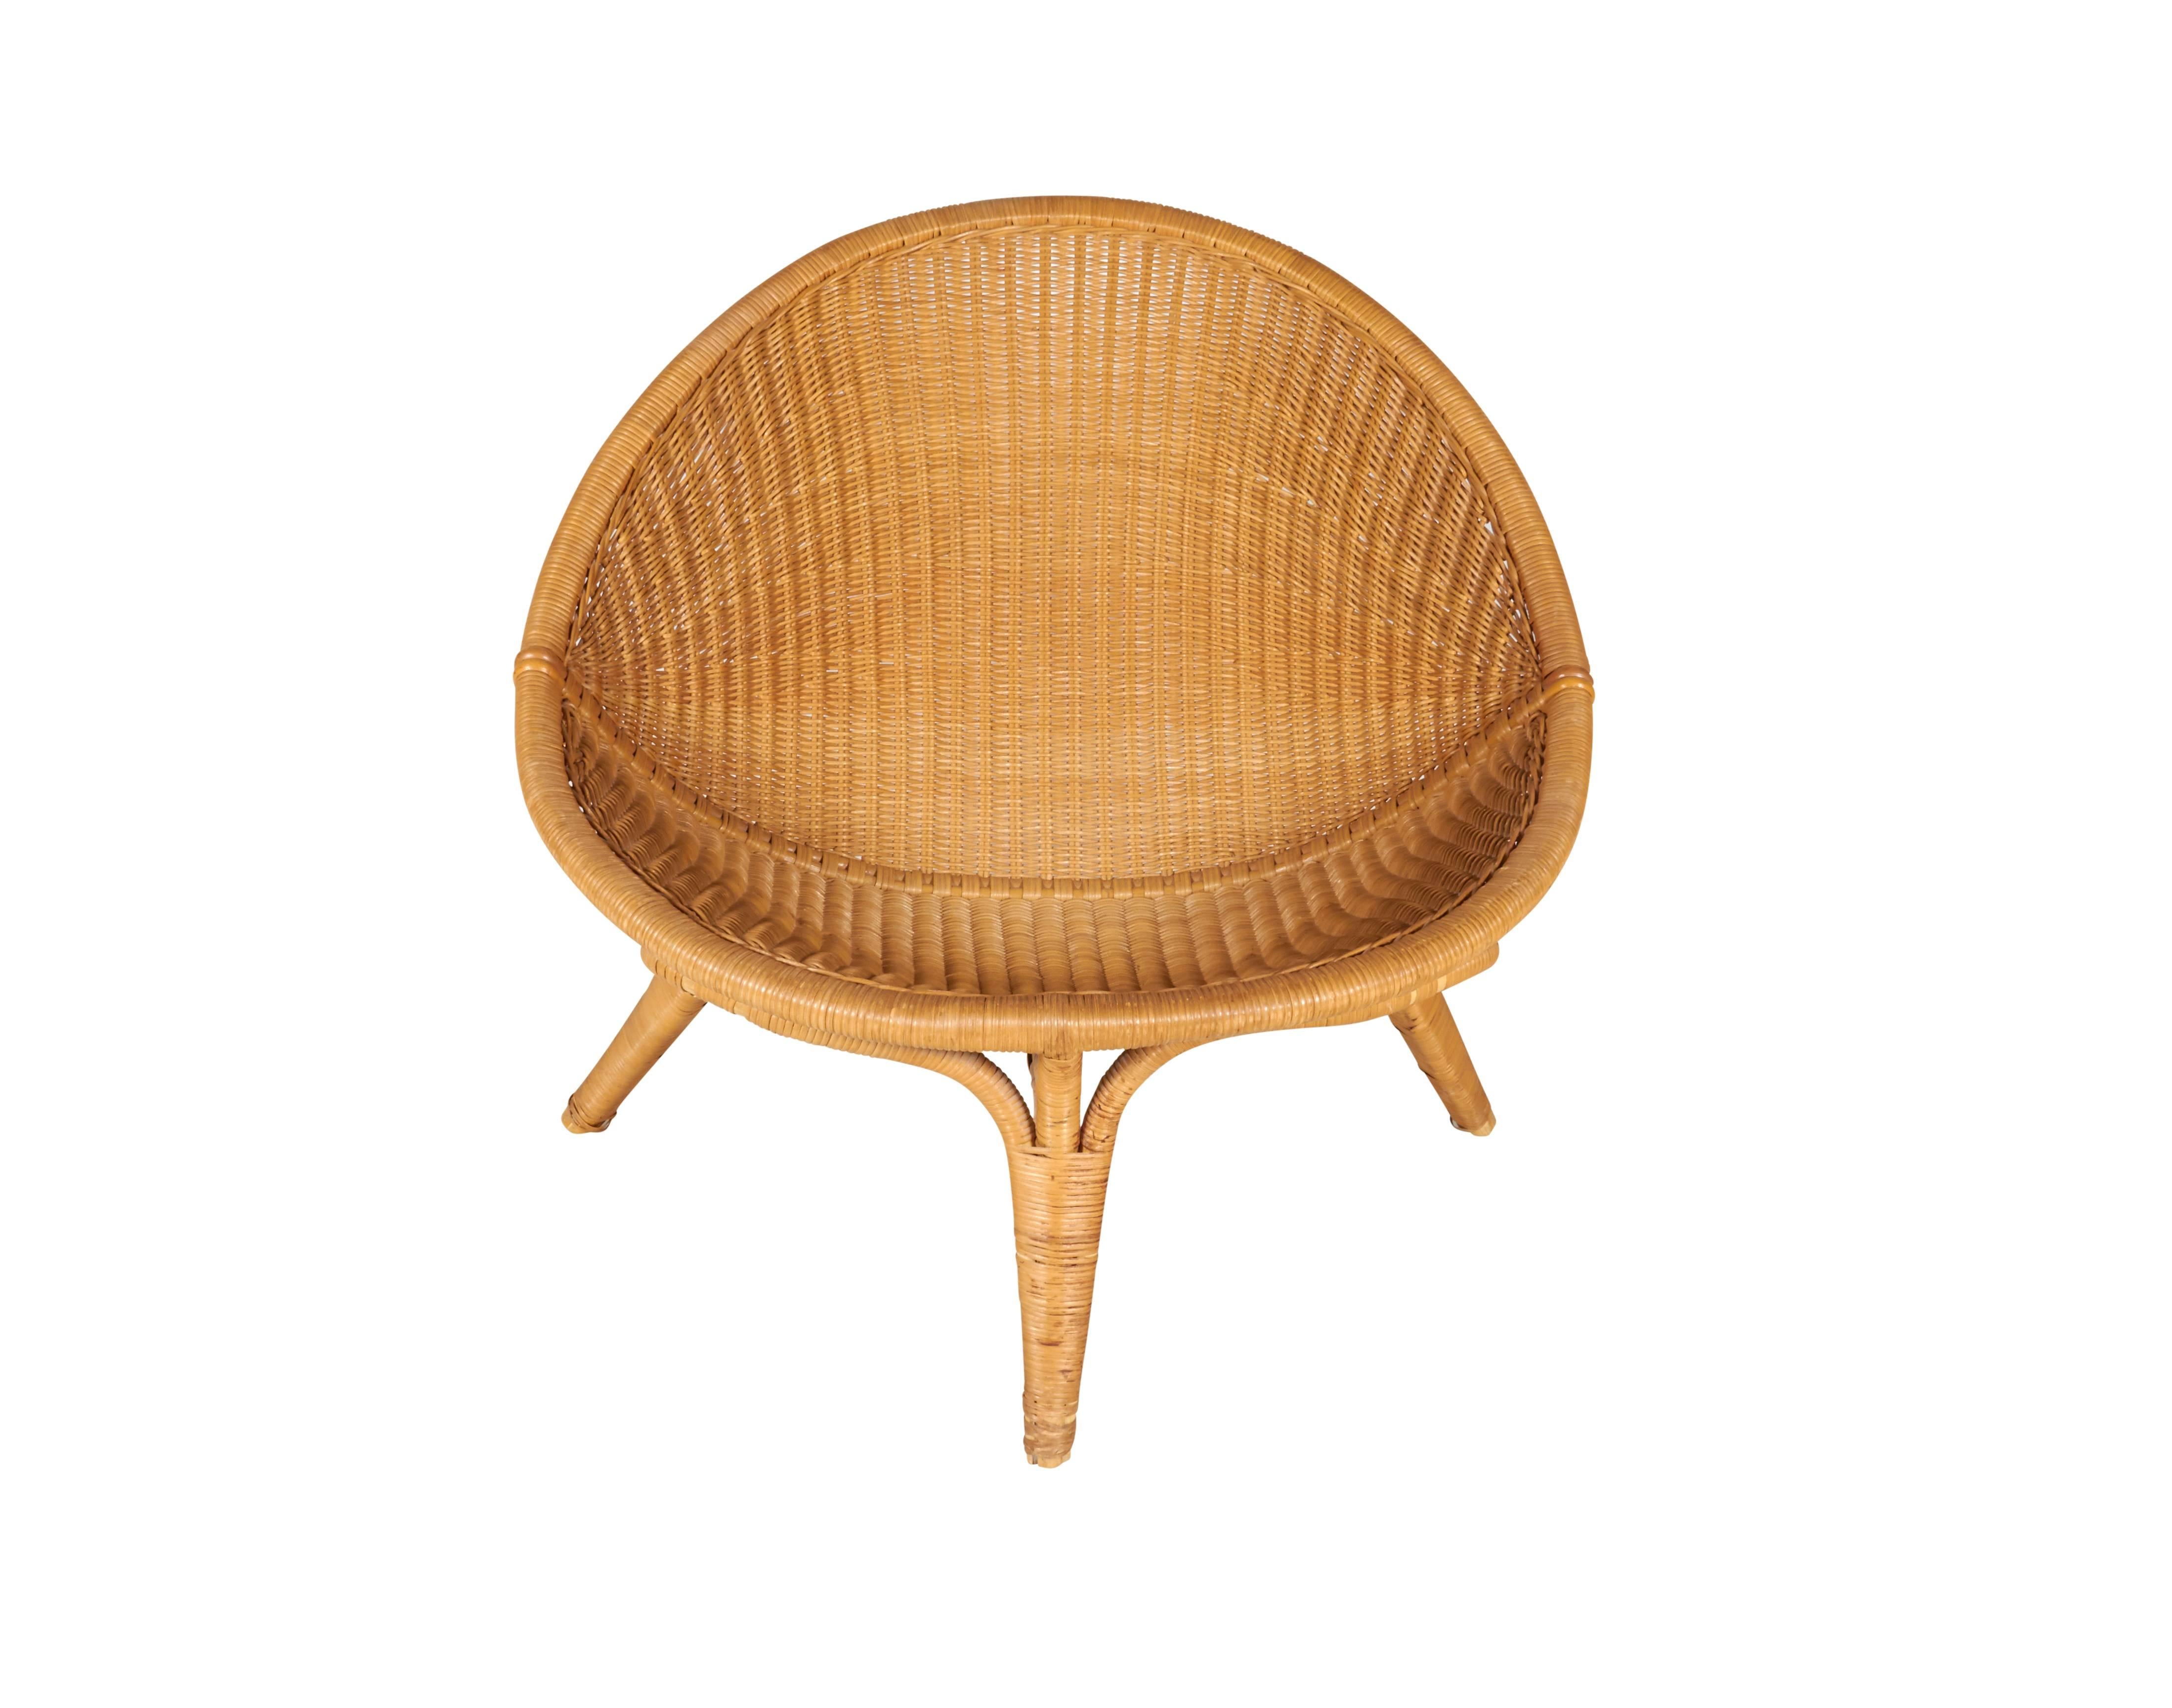 Ditzel's experimental approach to materials resulted in the three-legged rattan chair 